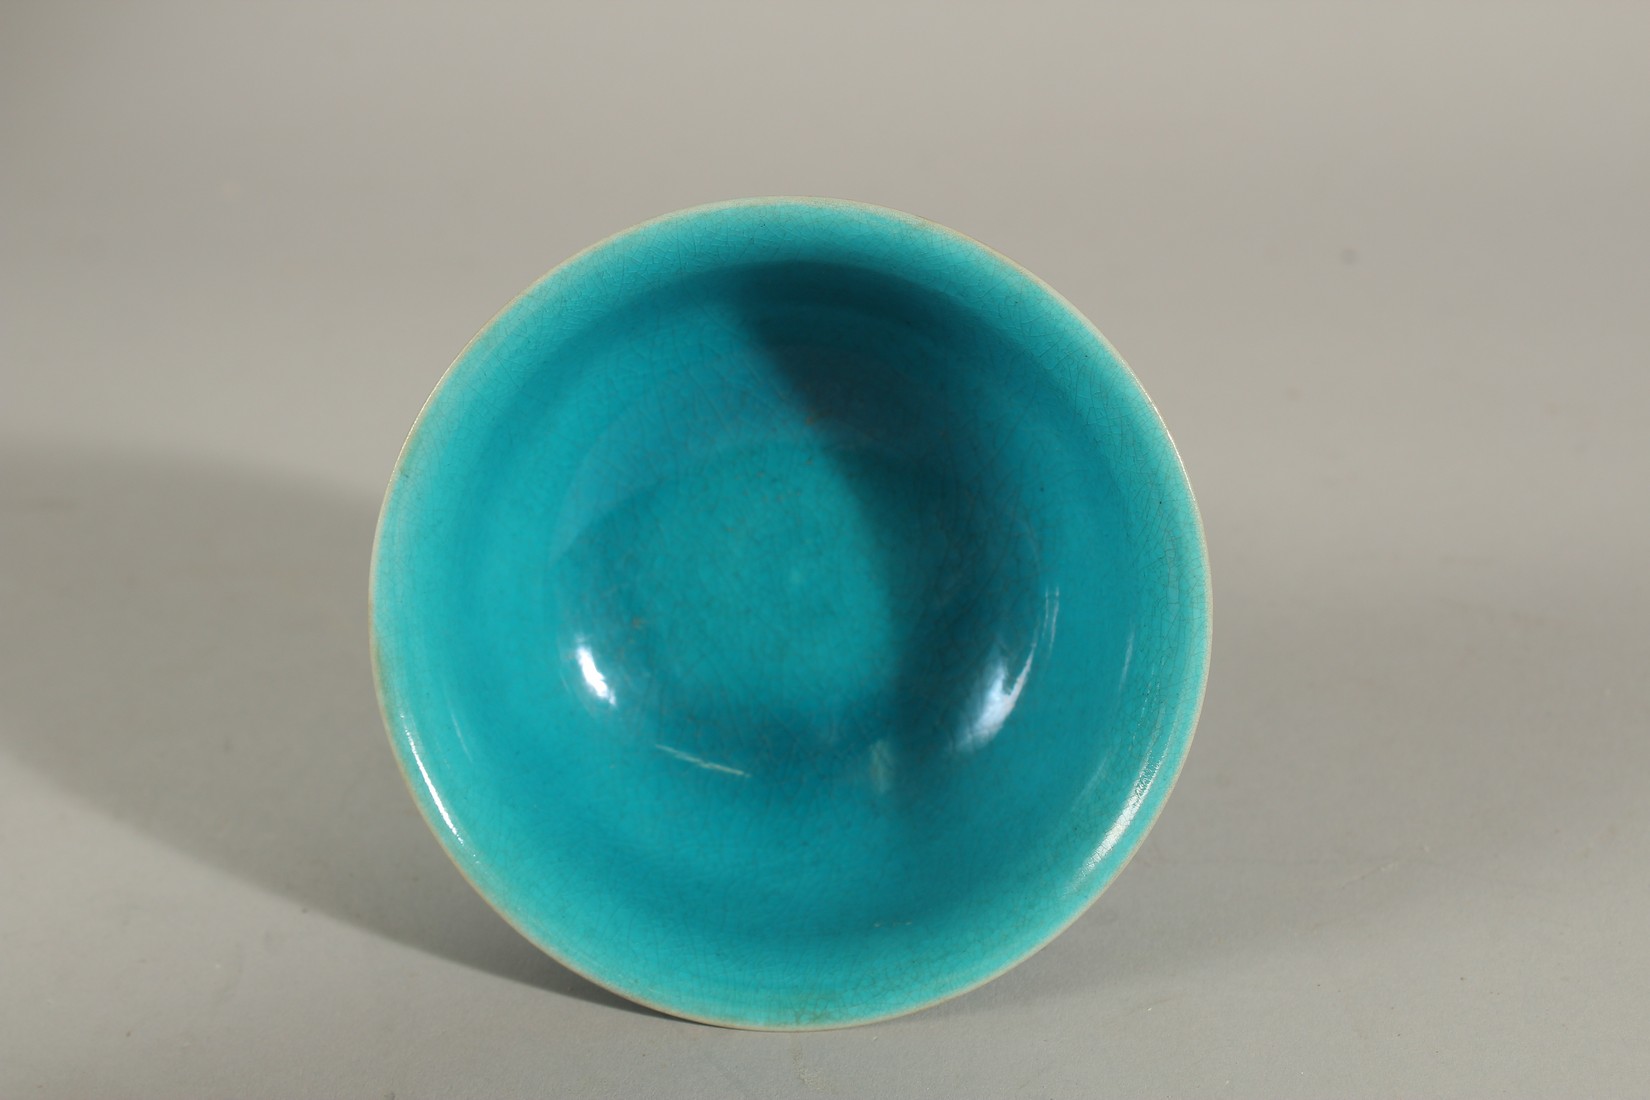 A CHINESE TURQUOISE GLAZE PORCELAIN STEM CUP, inner foot rim with character mark, 10cm diameter, 9cm - Image 5 of 6